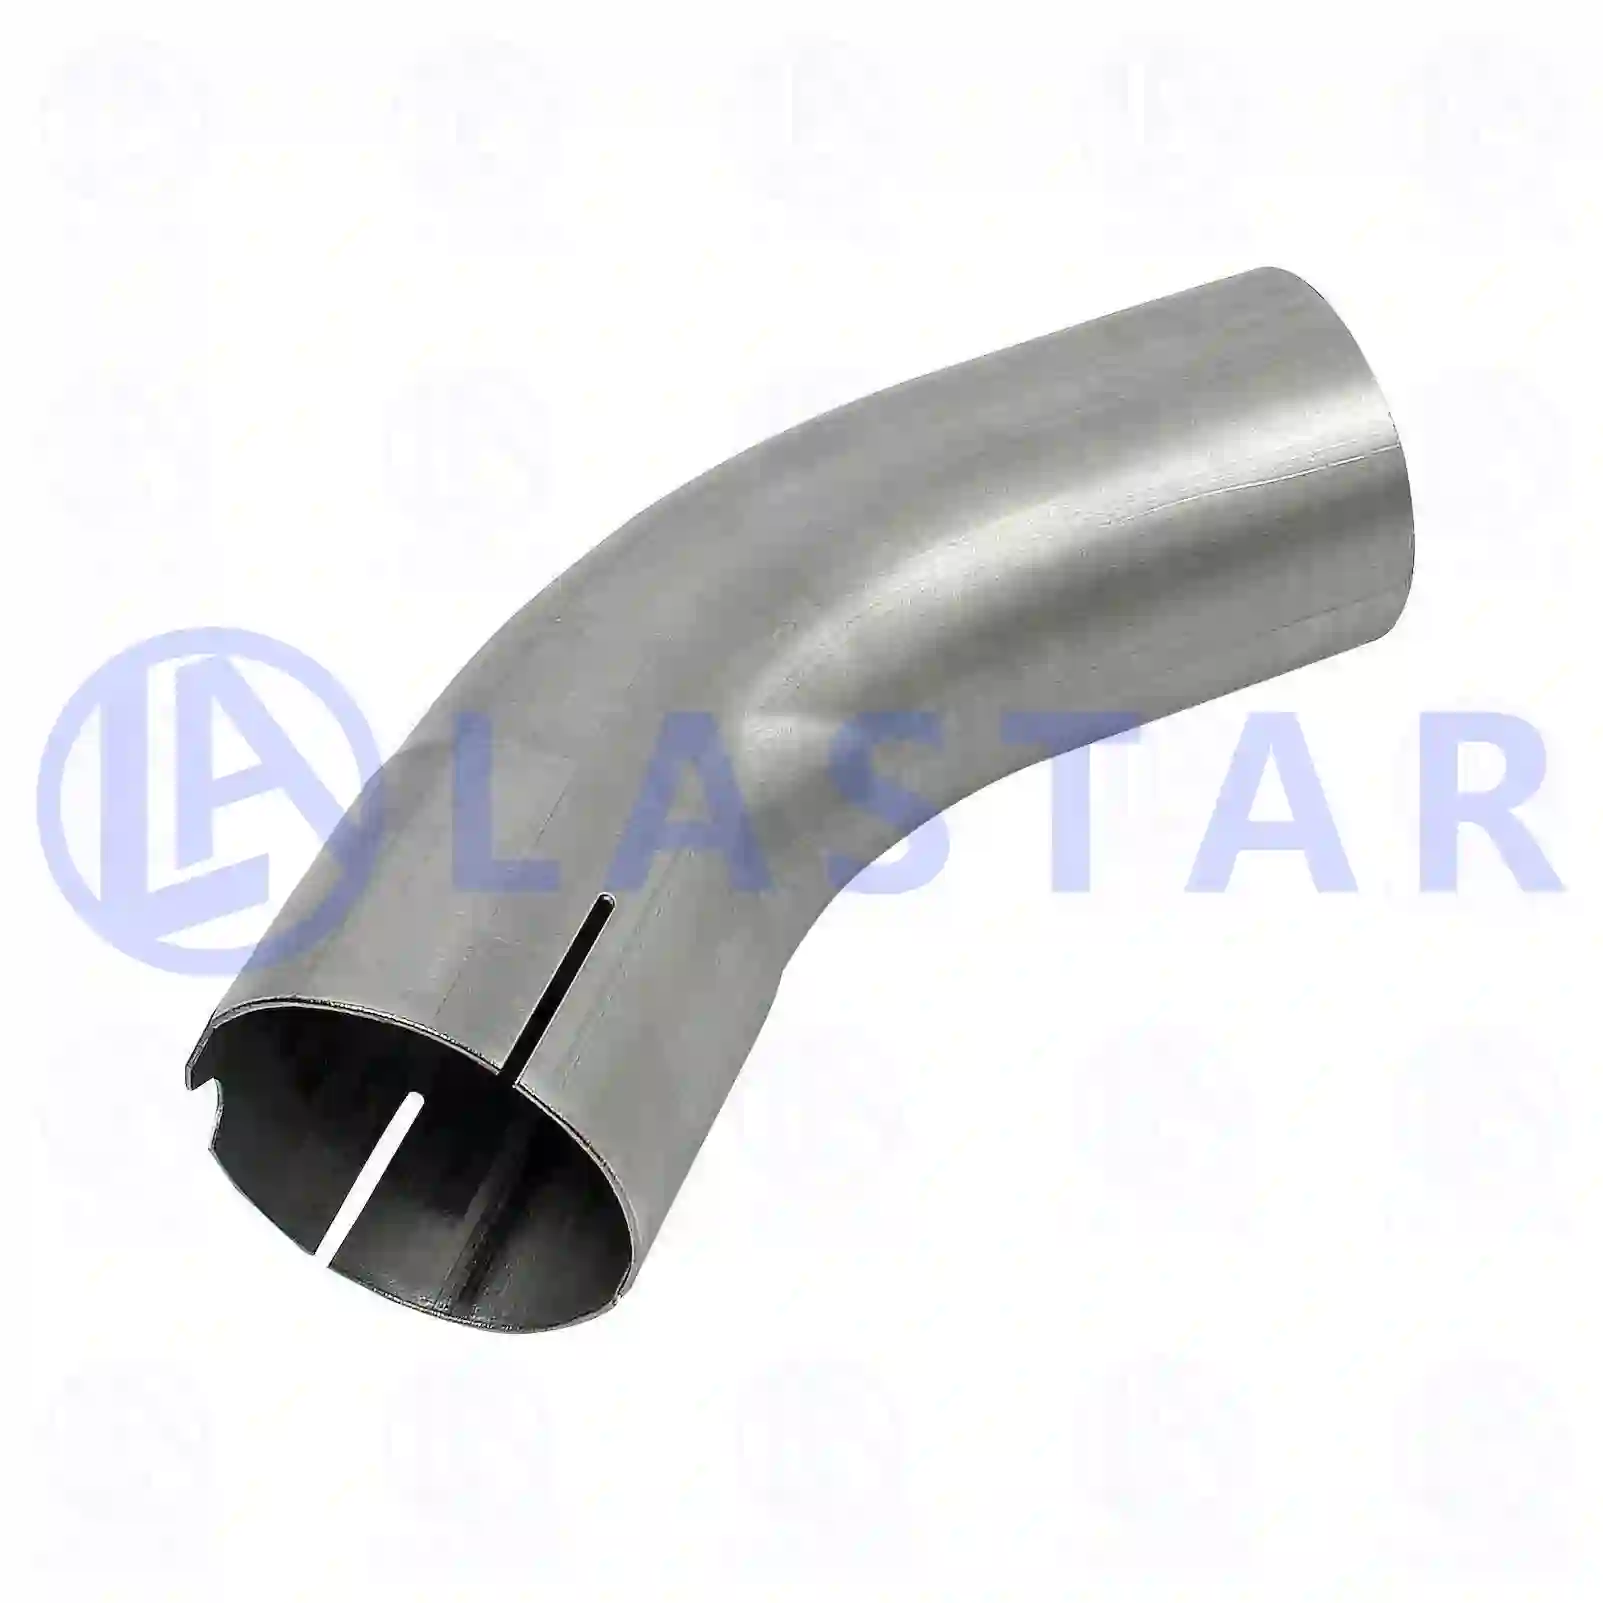 End pipe, 77706783, 500362808, ZG10288-0008 ||  77706783 Lastar Spare Part | Truck Spare Parts, Auotomotive Spare Parts End pipe, 77706783, 500362808, ZG10288-0008 ||  77706783 Lastar Spare Part | Truck Spare Parts, Auotomotive Spare Parts